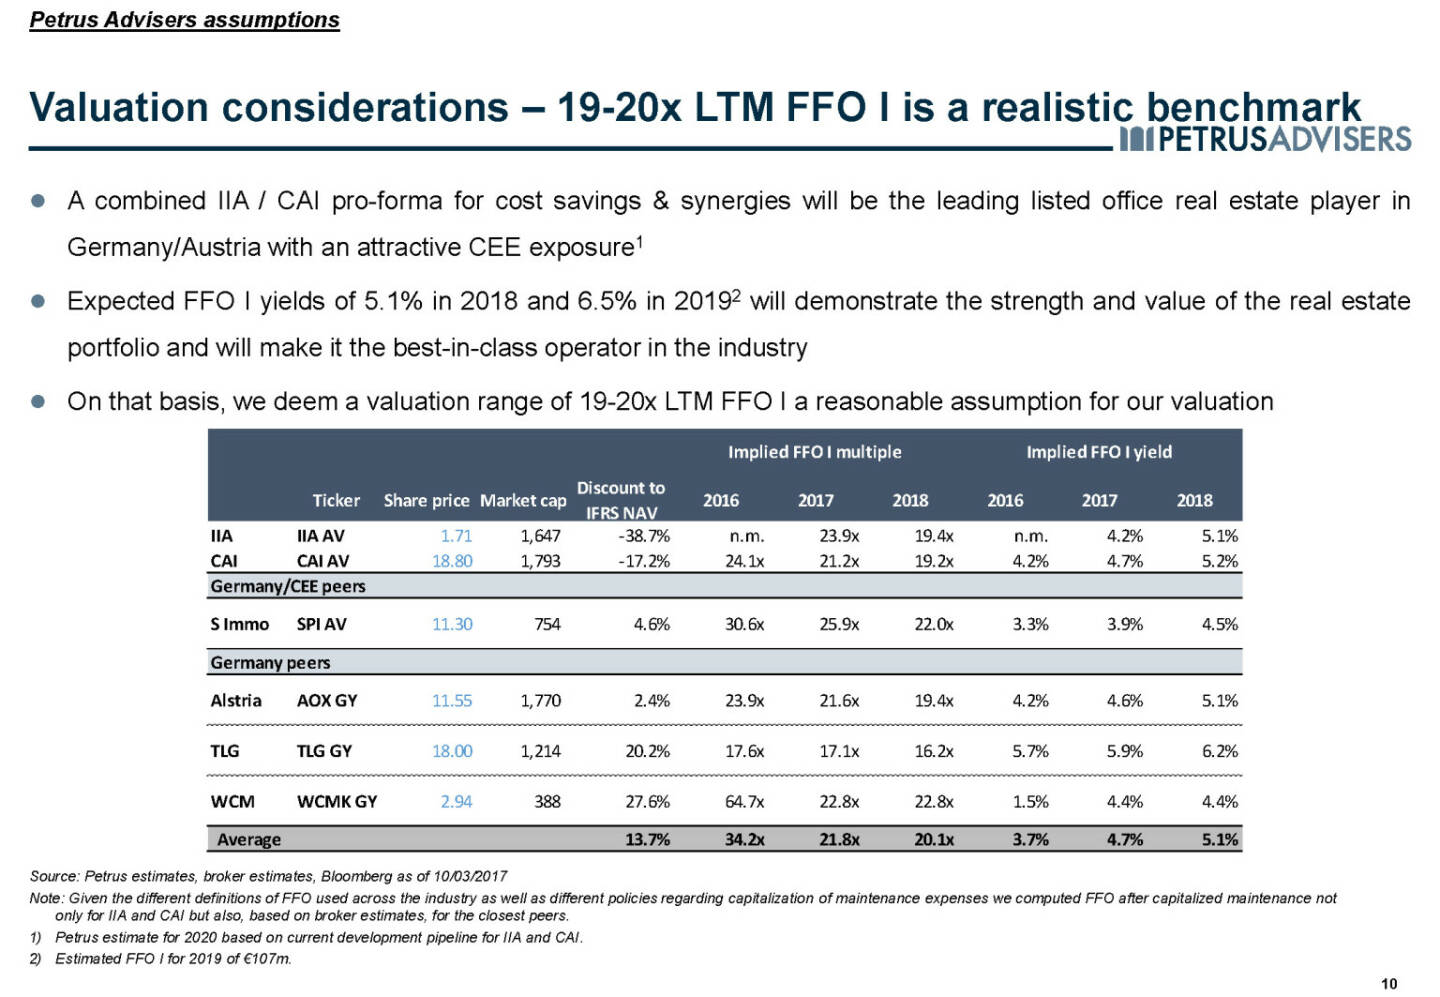 Valuation considerations – 19-20x LTM FFO I is a realistic benchmark - Petrus Advisers